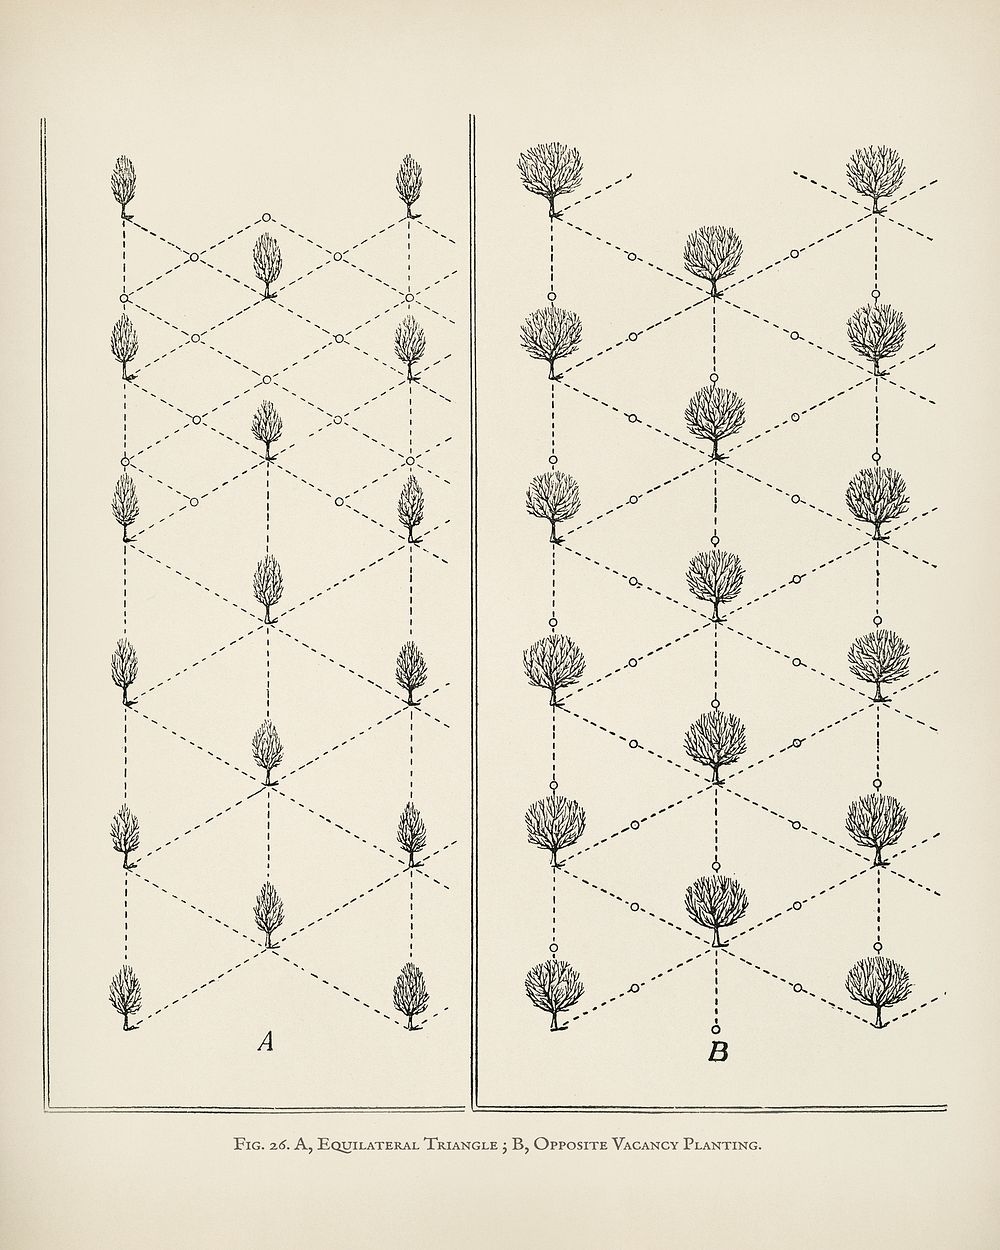 The fruit grower's guide : Vintage illustration of equilateral triangle